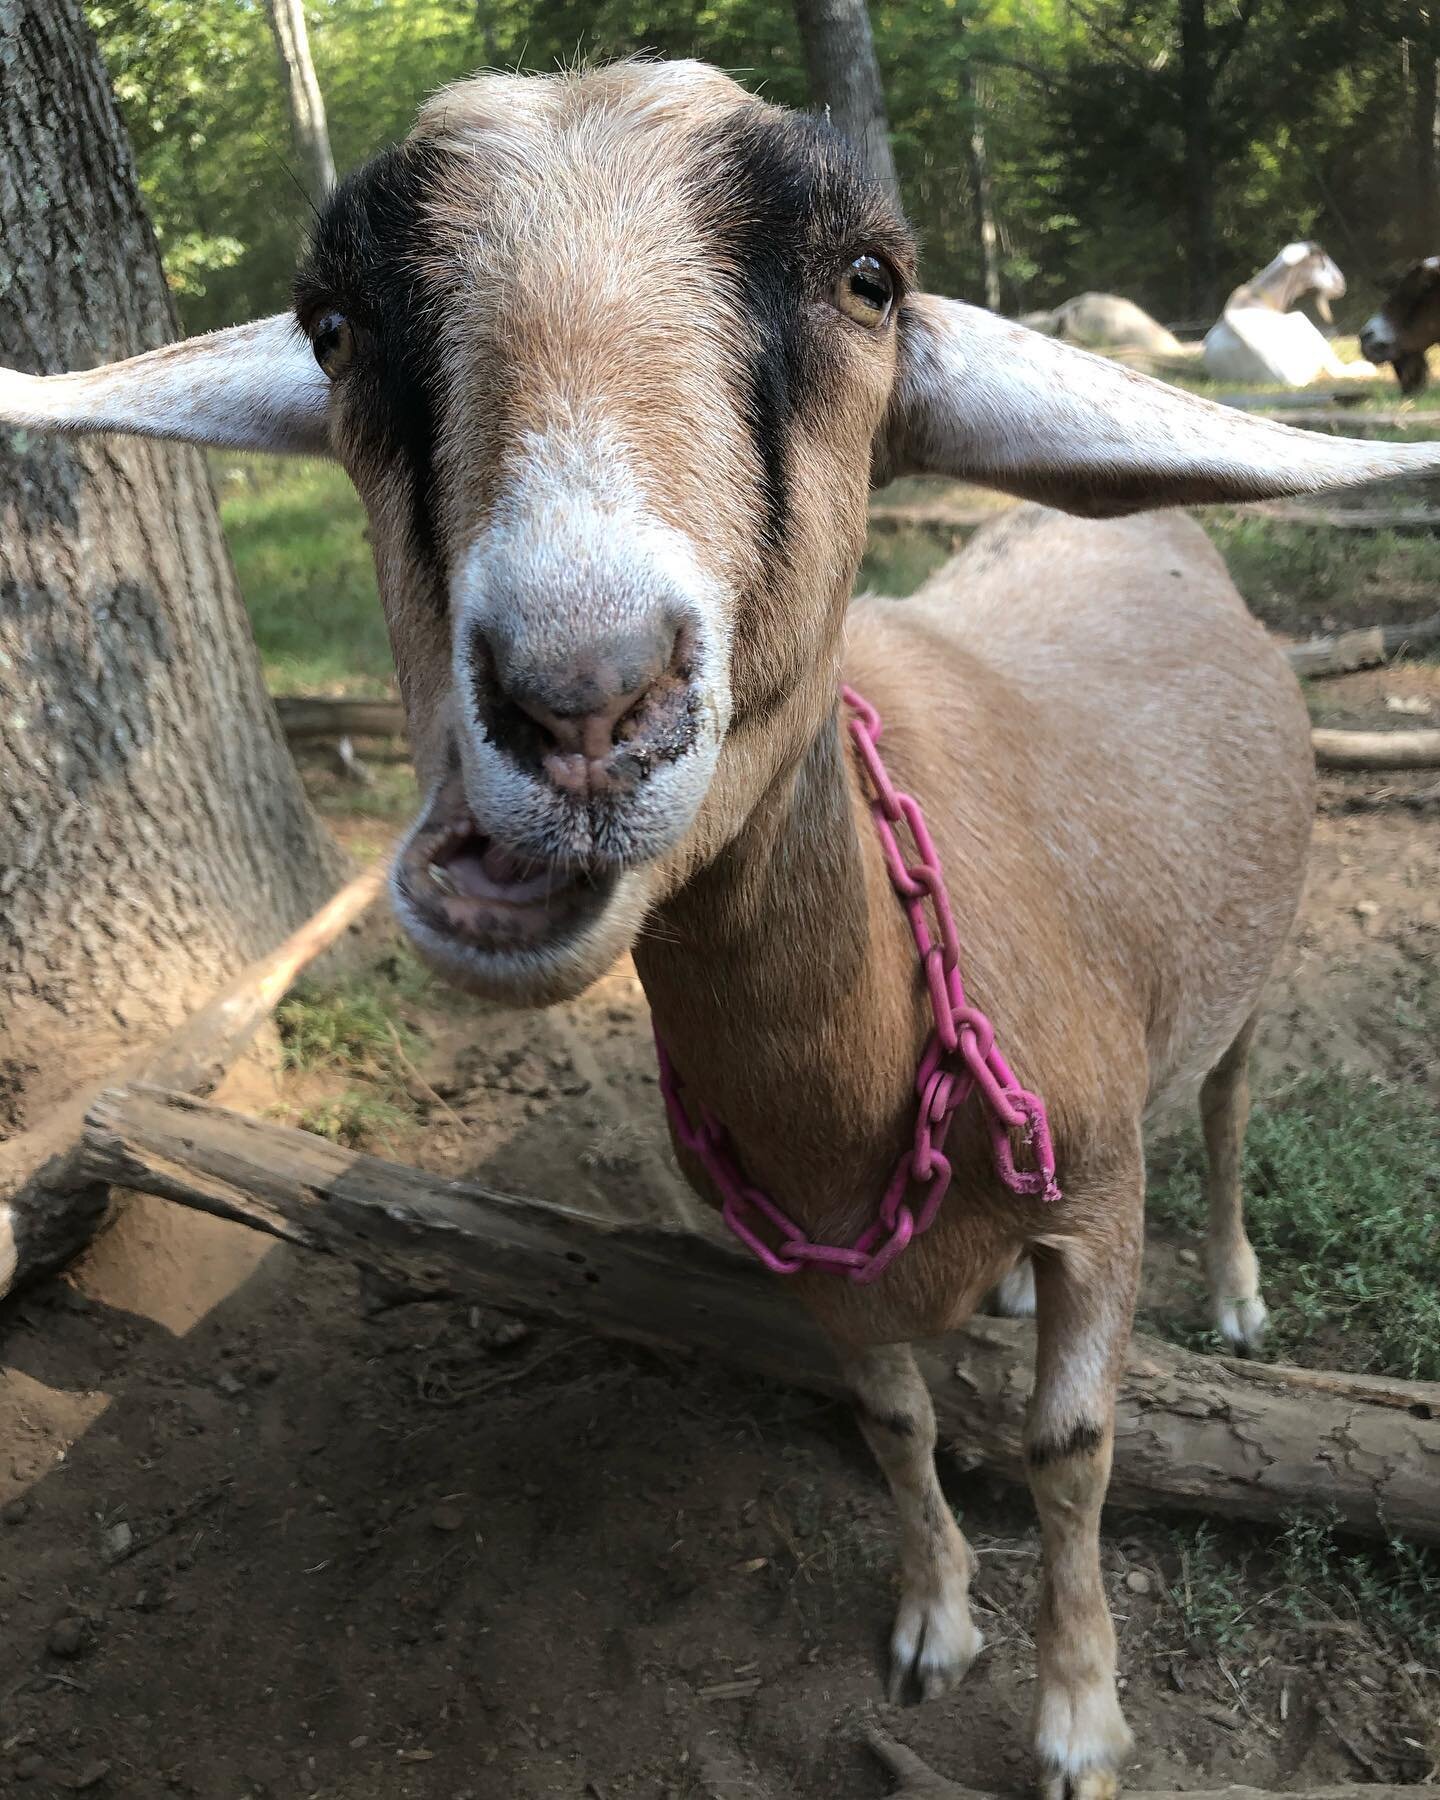 Sugar would like to remind you that we are NOT participating in Open Creamery Day today! Our Farm Store is still open as it usually is (8am-6 pm), but we won&rsquo;t be giving tours of our creamery or offering visits with the goats. It&rsquo;s been a